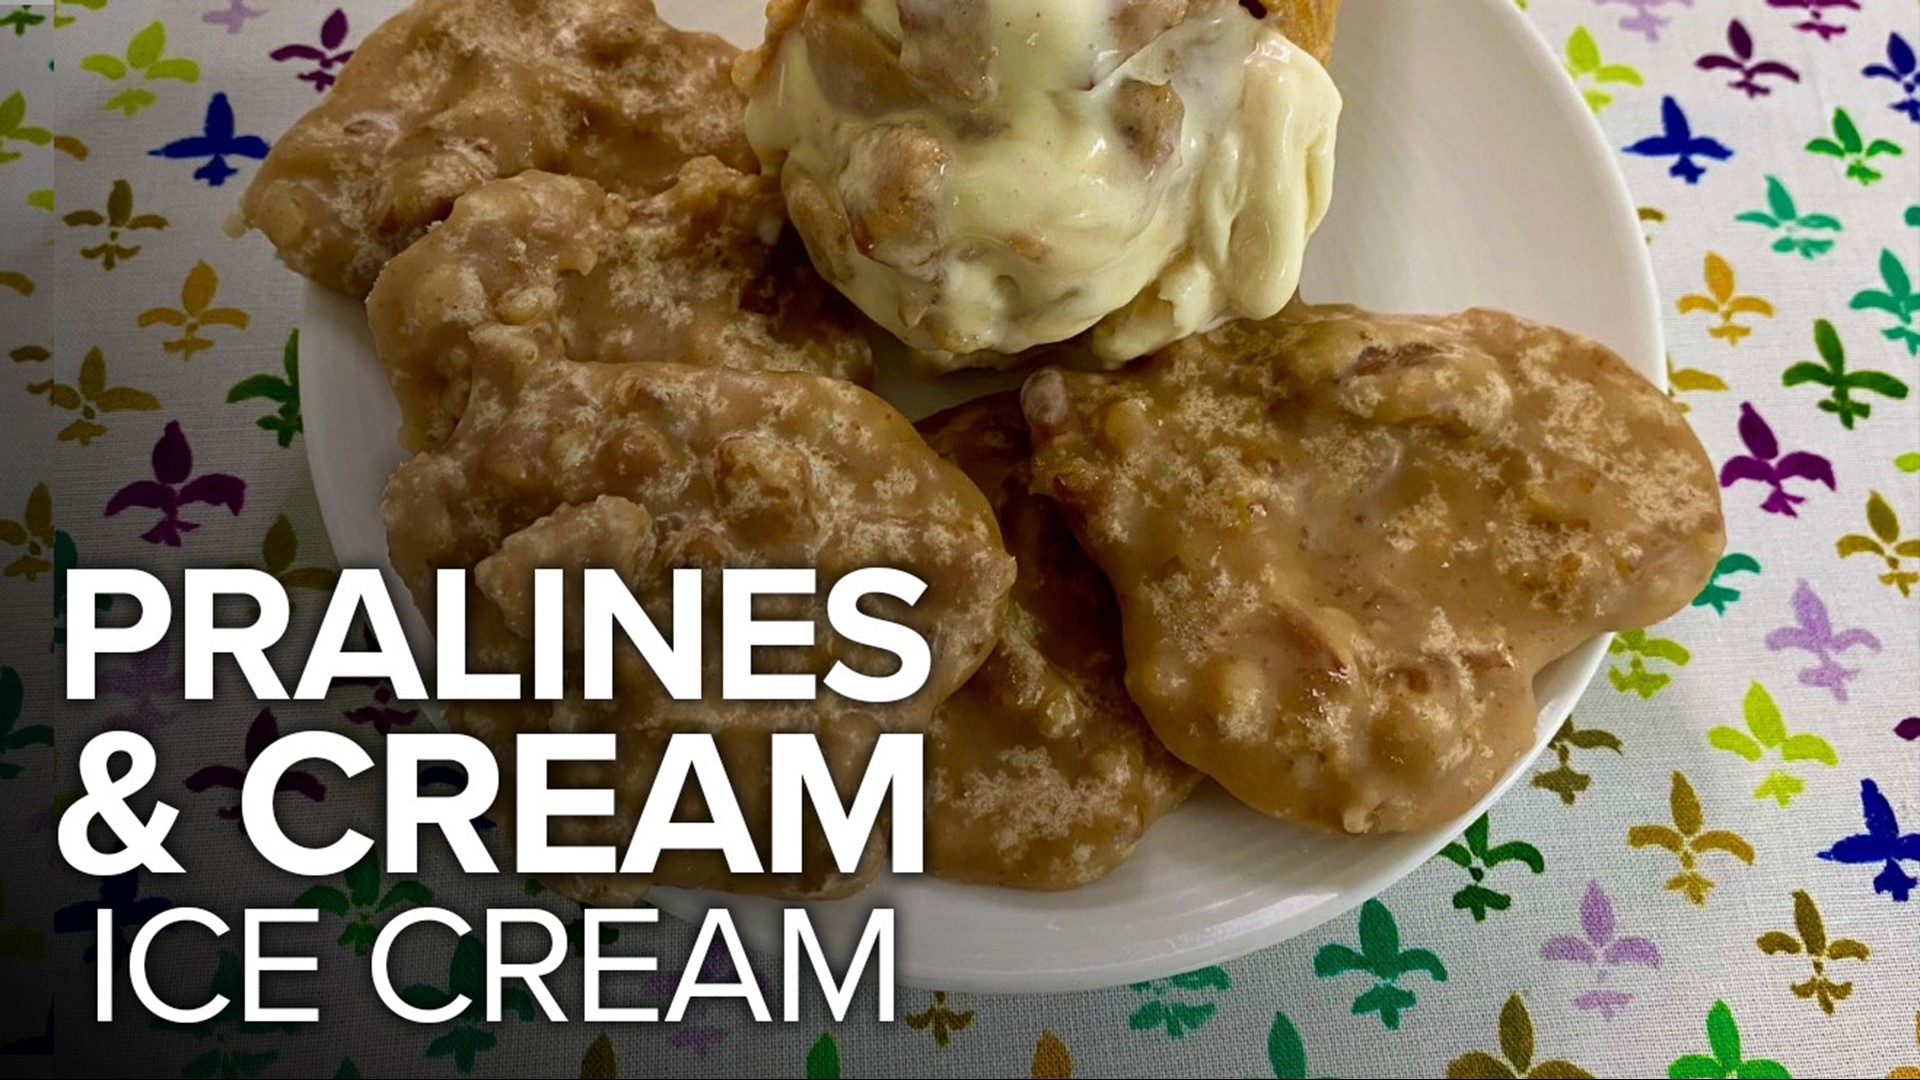 It's National Praline Day! So we're going to make some pralines, then turn them into ice cream.